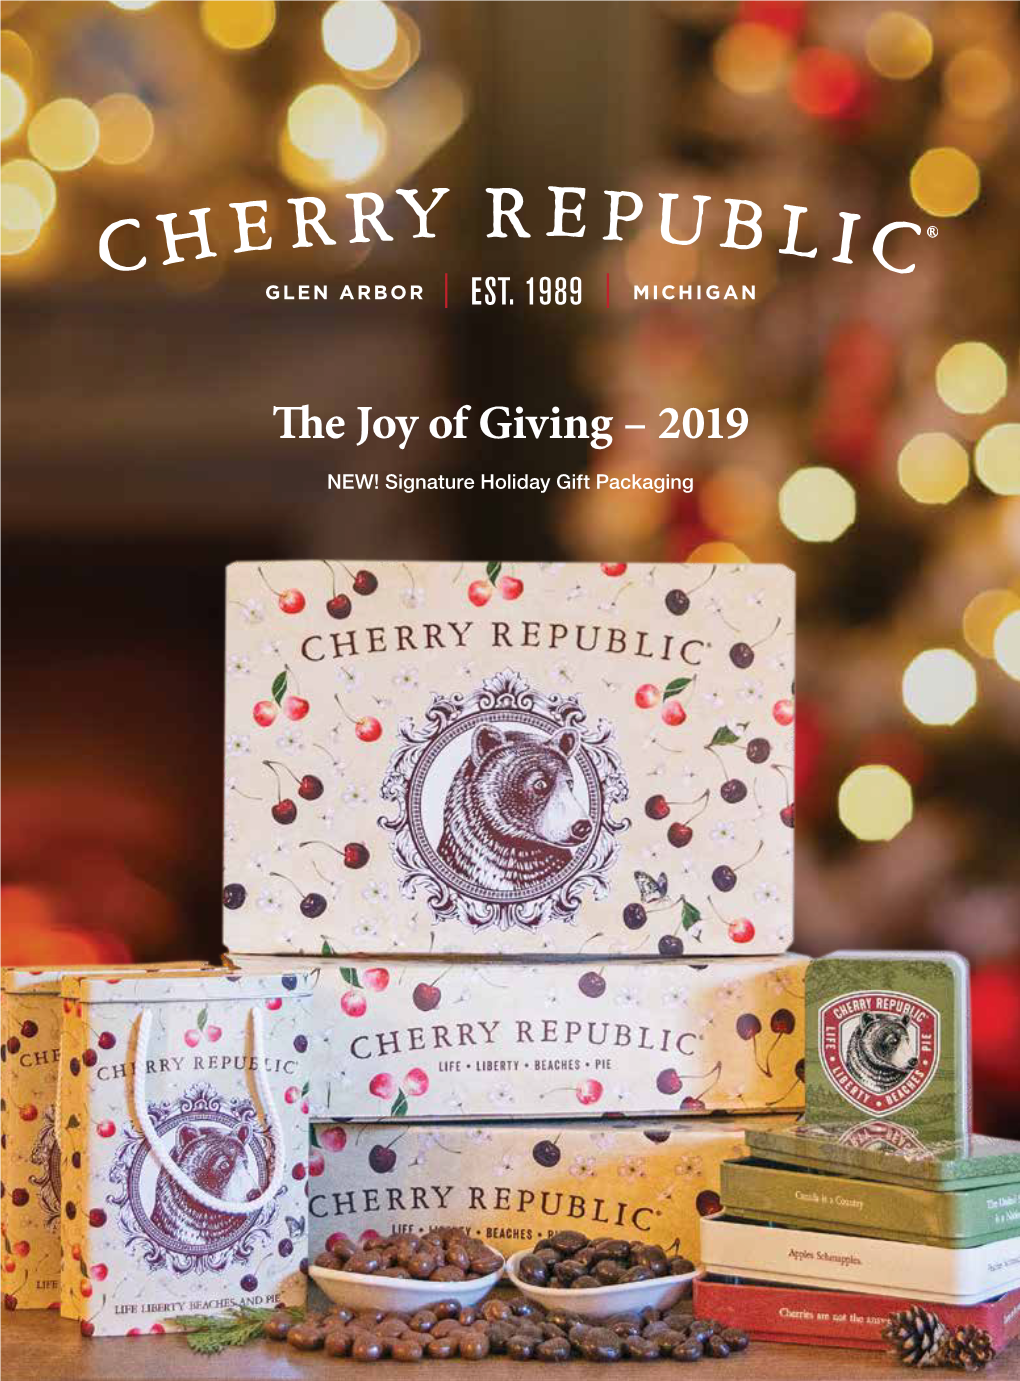 The Joy of Giving – 2019 NEW! Signature Holiday Gift Packaging Seasons Greetings from the Sacred Lands of the Cherry Republic!